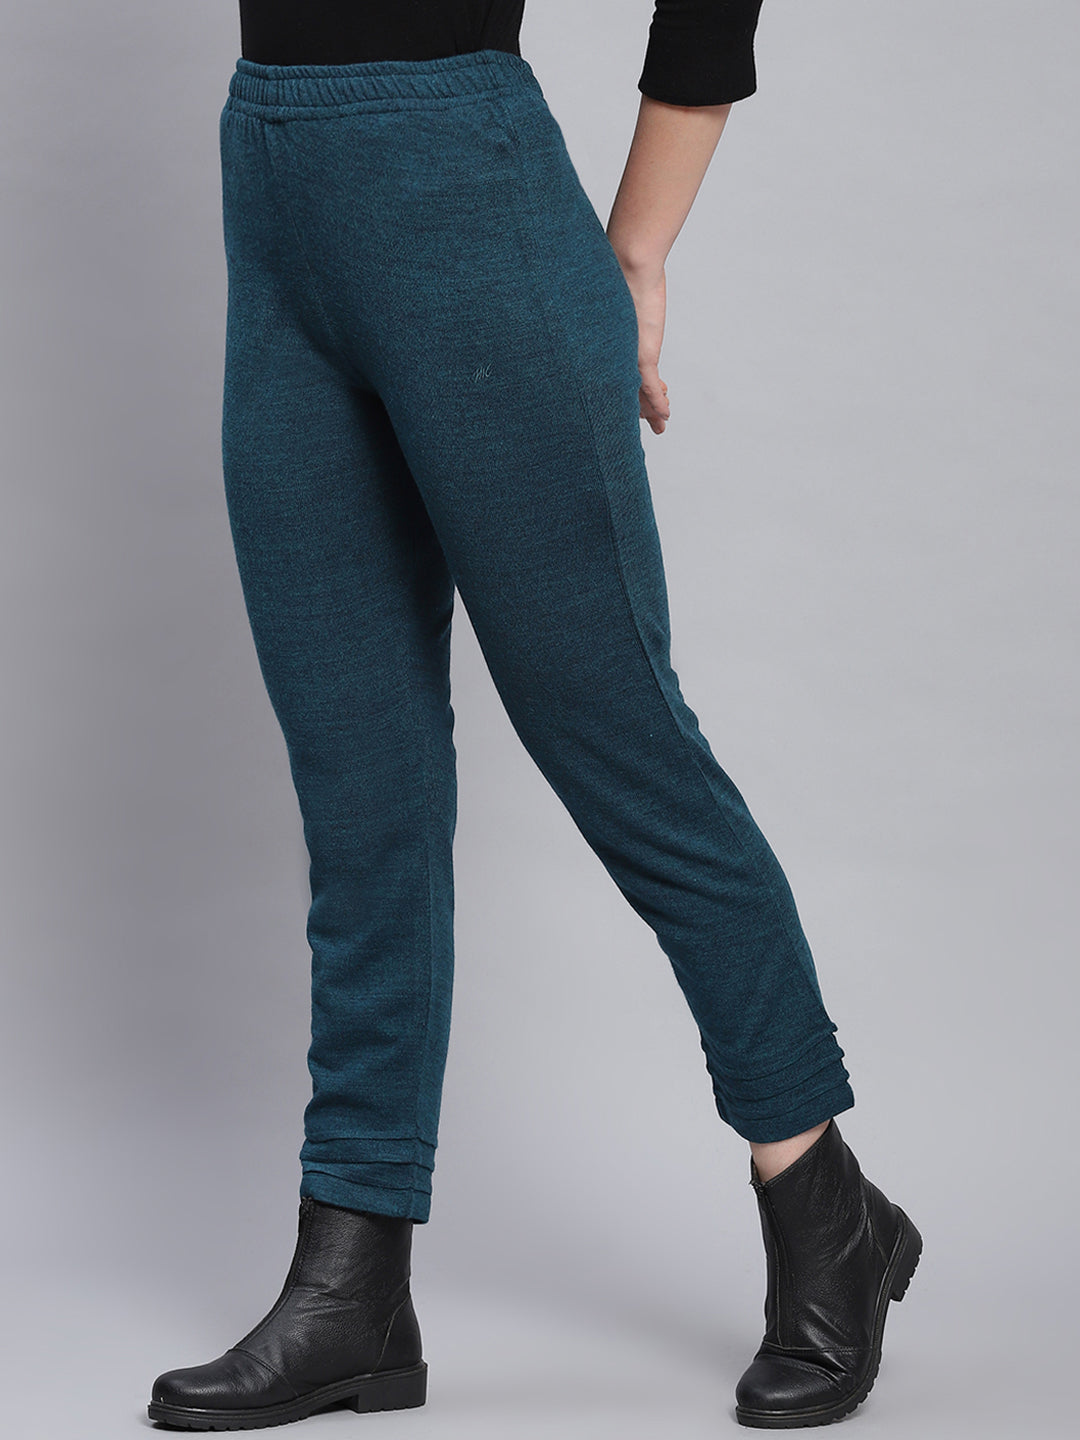 Women Teal Blue Solid Regular Fit Lowers